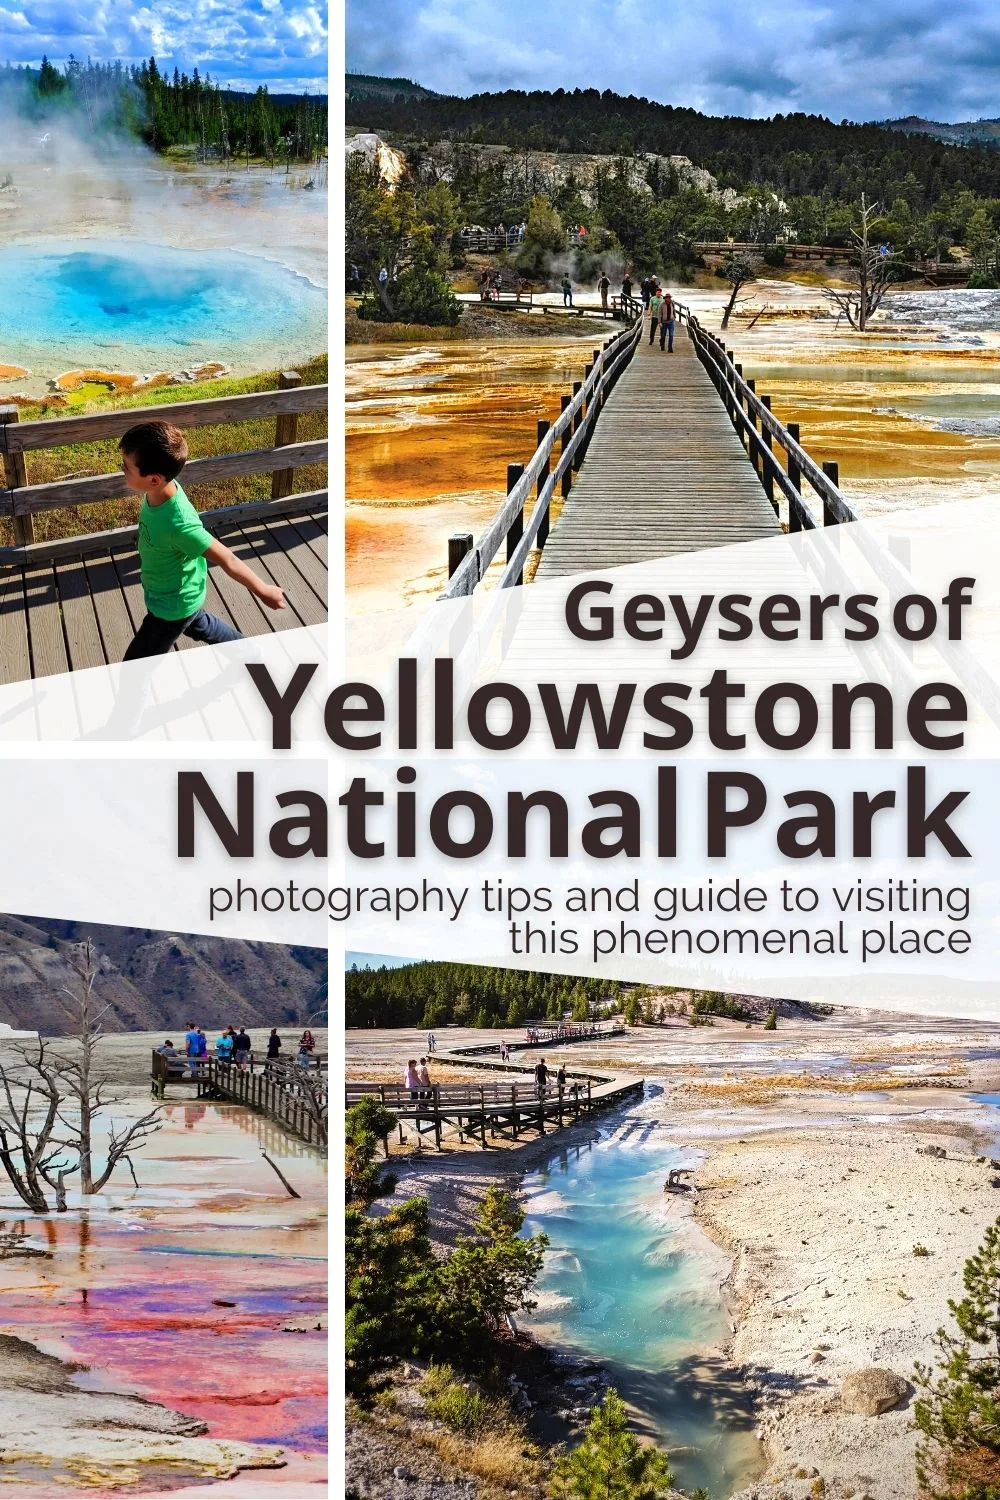 Geysers are some of the most interesting things to see in Yellowstone National Park. Guide to visiting the best geysers AND photography tips to make your Yellowstone pictures stand out.